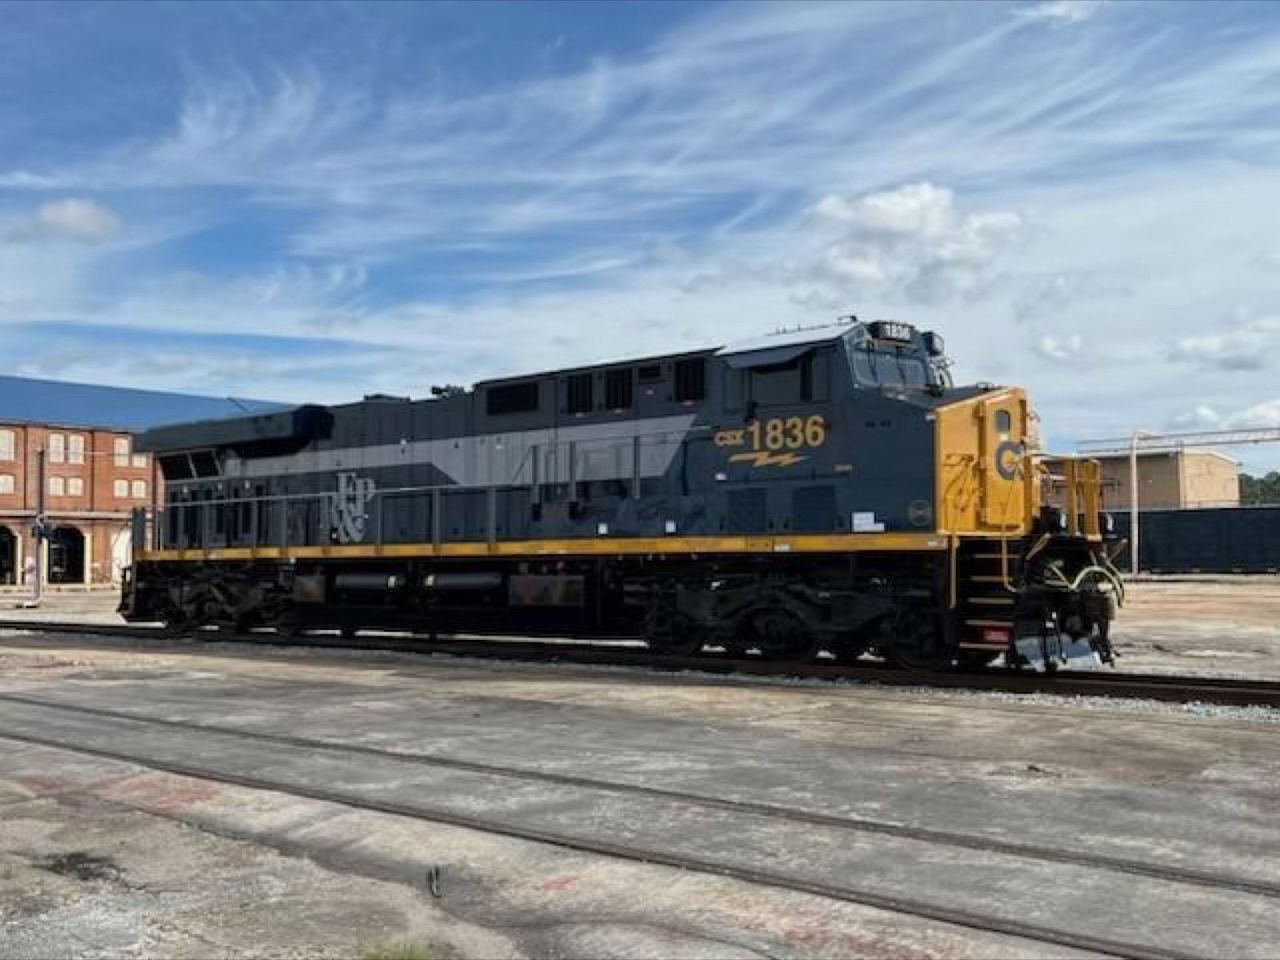 CSX No. 1836 is the tenth in a series of heritage locomotives to roll out of the Class I's paint shop in Waycross, Ga. (CSX photo via LinkedIn)